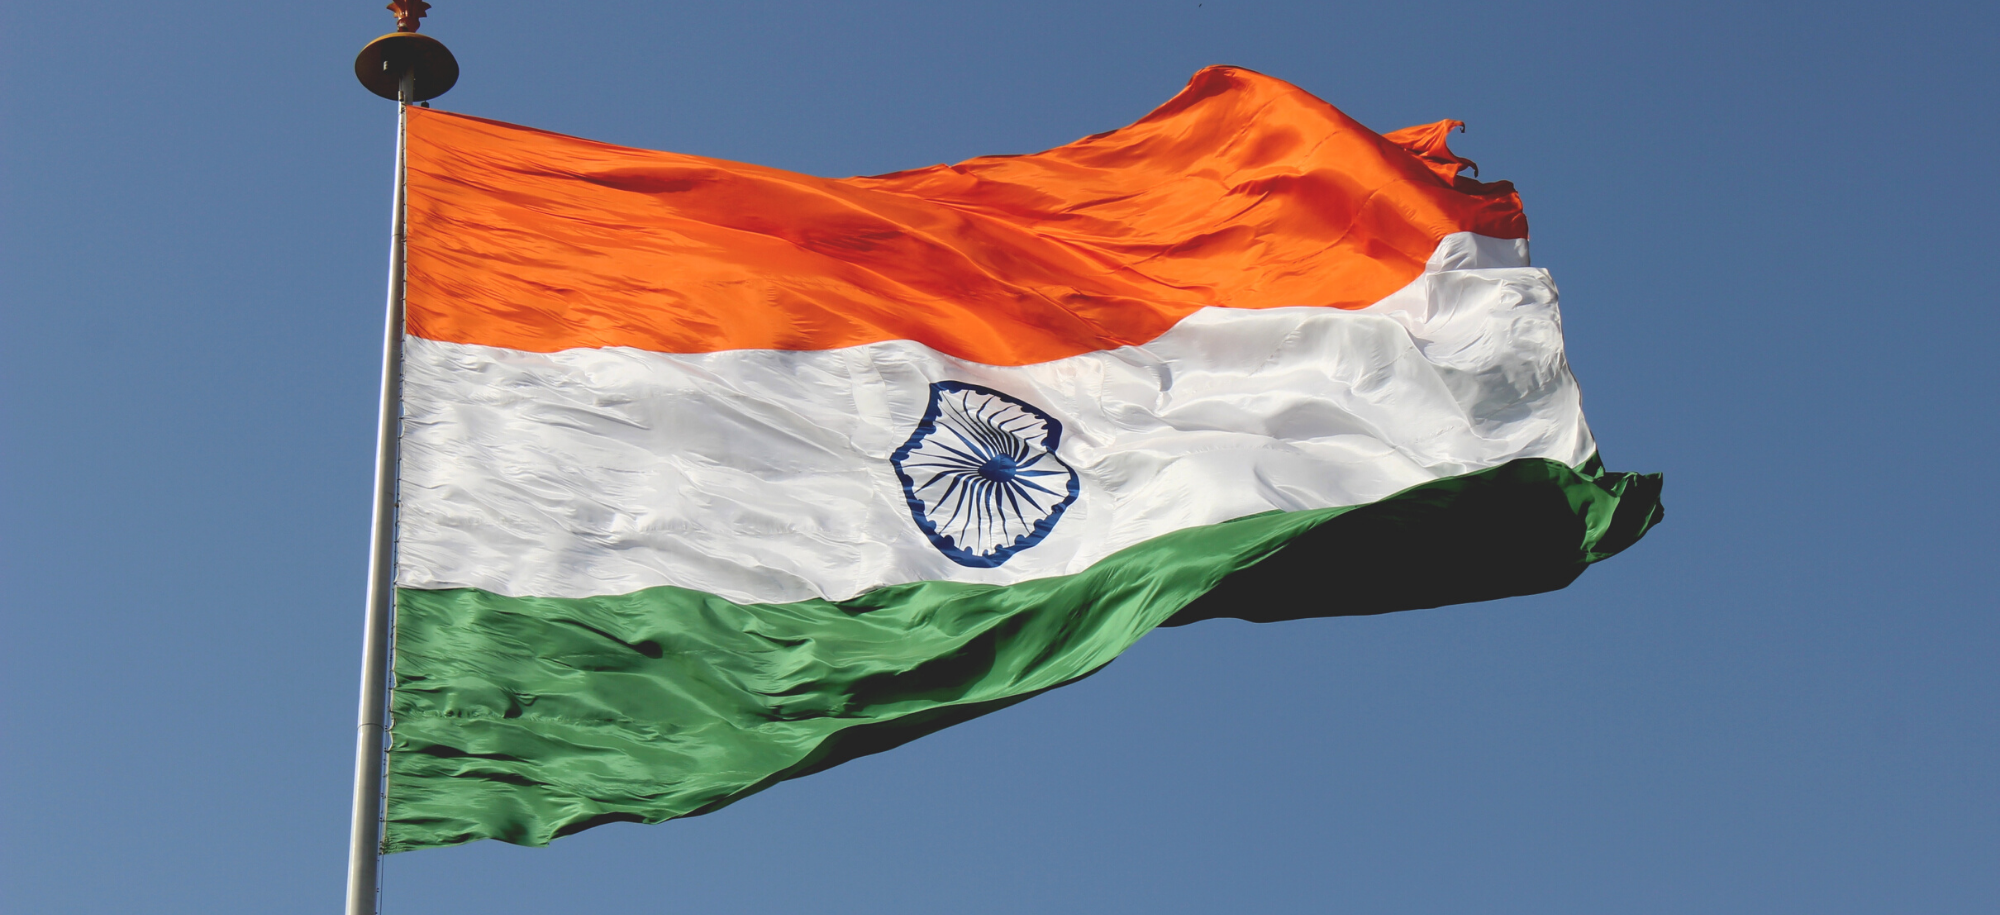 Indian flag blowing in the wind